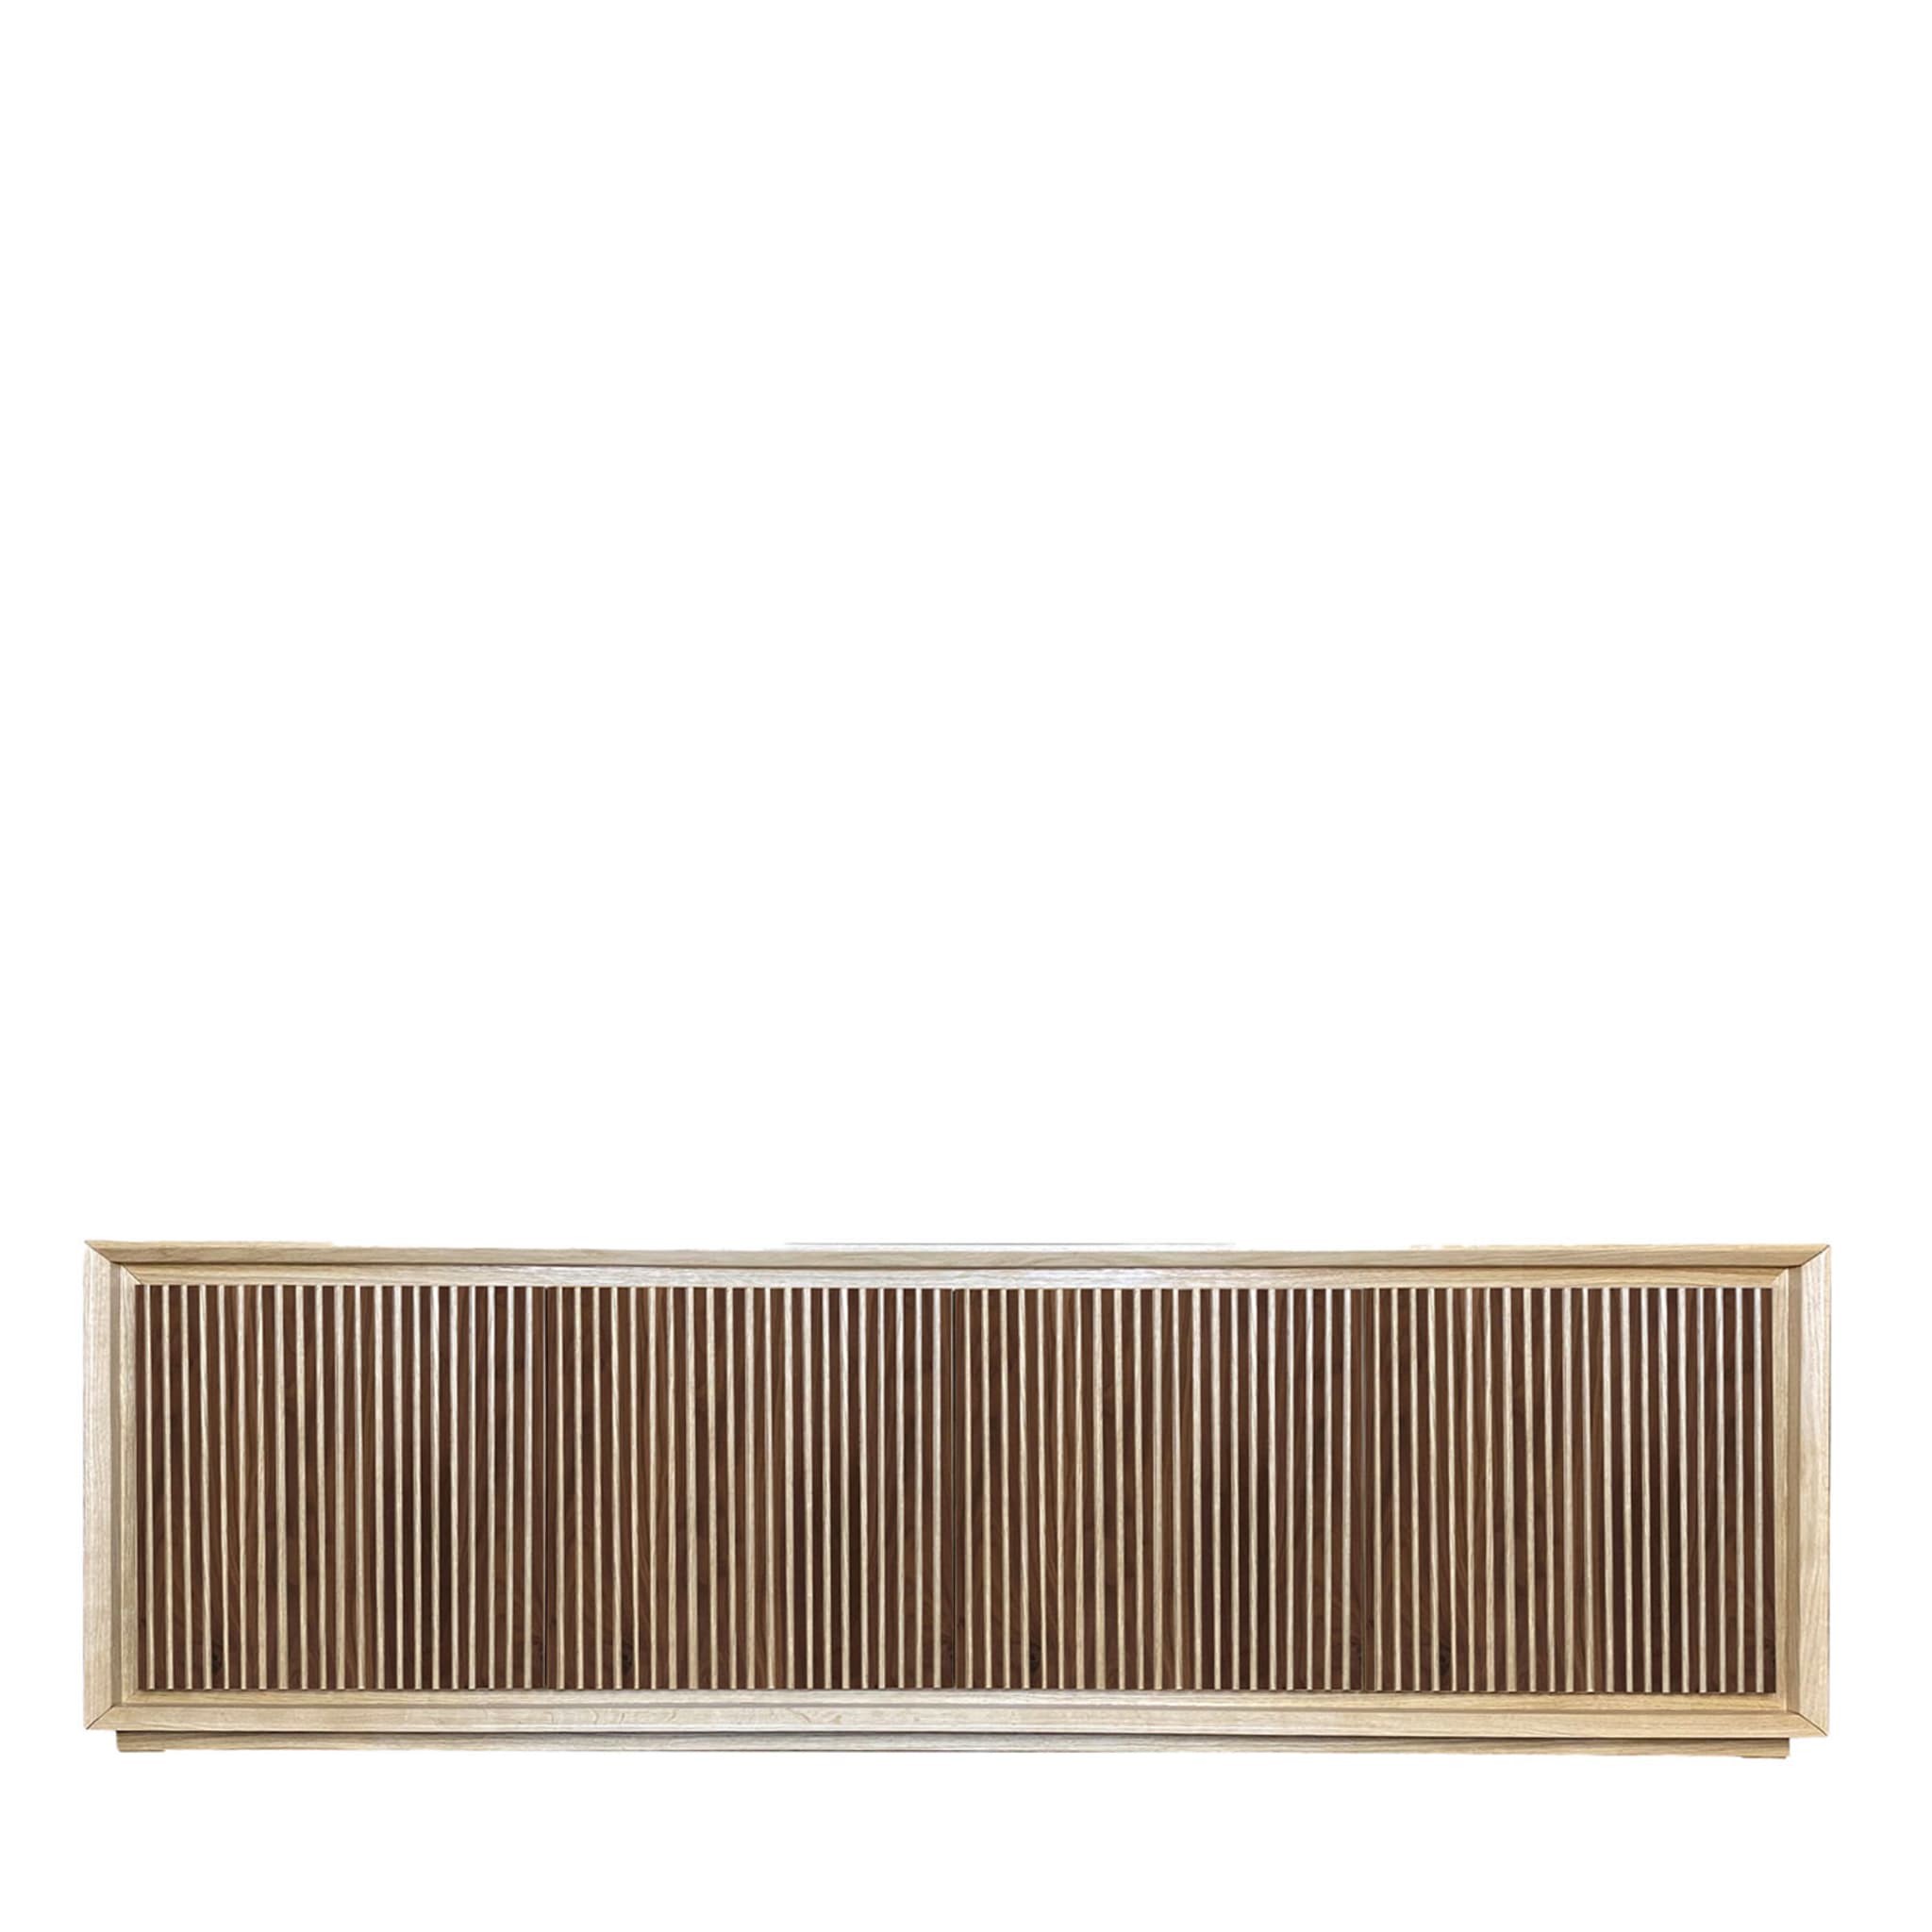 Fuga Noce Due 4-Door Grooved Sideboard by Mascia Meccani - Main view